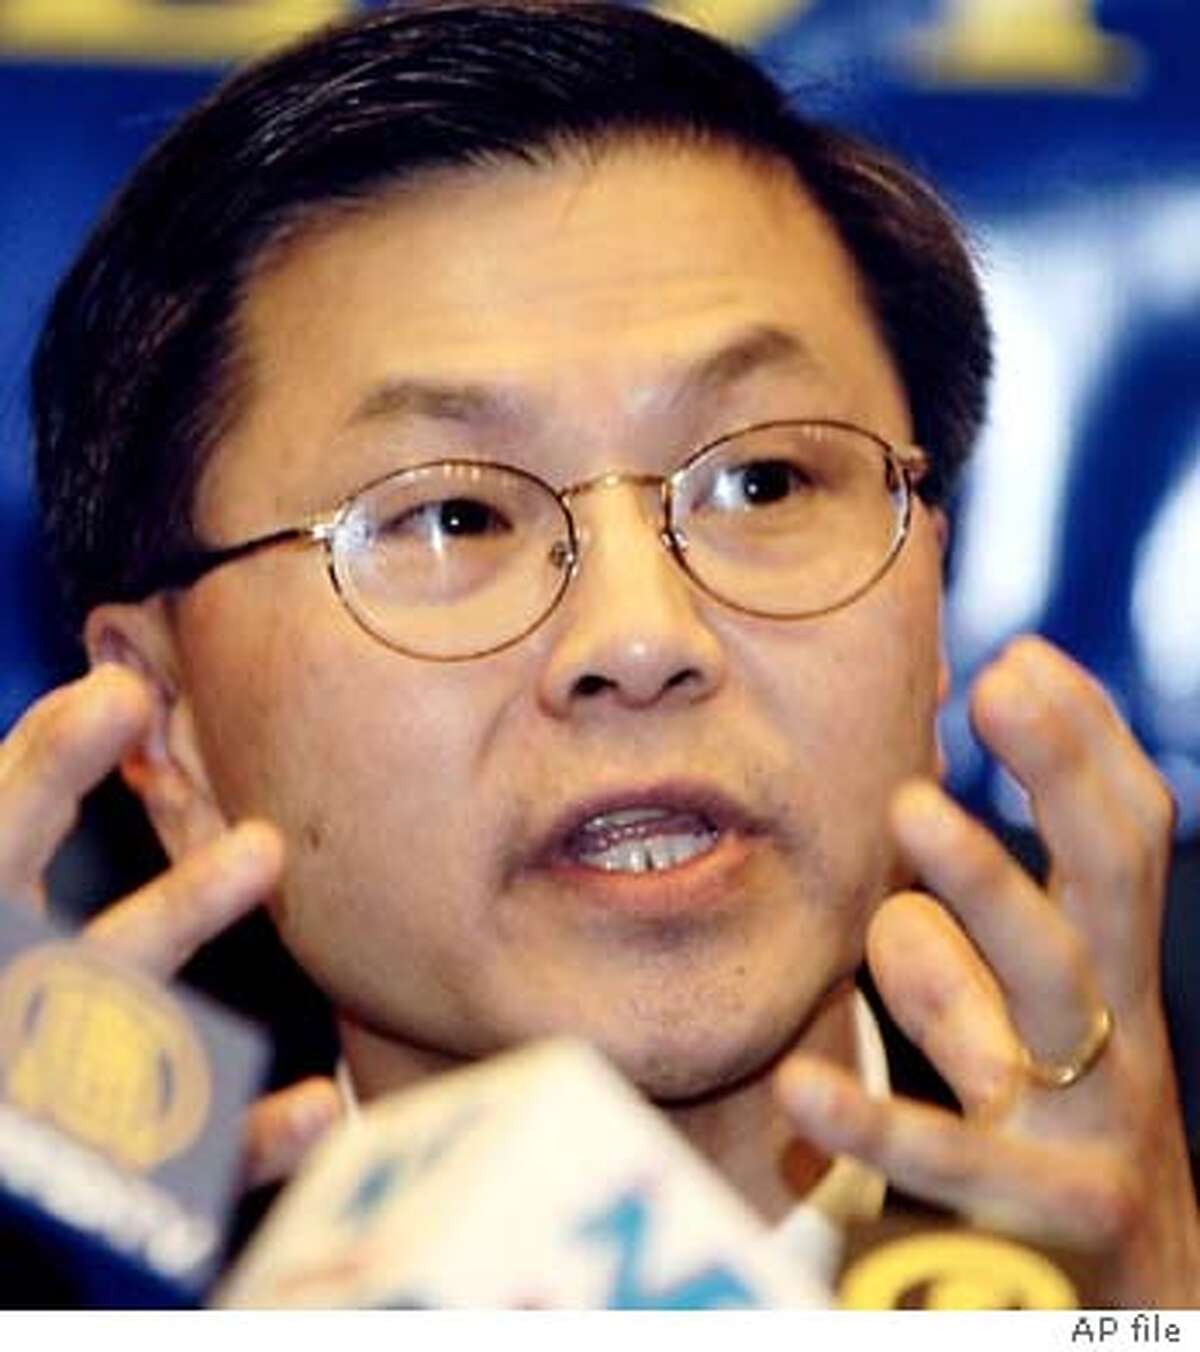 Dr. David Ho, one of the researchers who pioneered the drug cocktail treatment for AIDS patients, gestures during a press conference in Hong Kong Sunday, May 11, 2003. Ho said the SARS virus apparently attacks people's cells in a manner similar to the AIDS virus, which may offer clues for finding the best drugs to treat the newly discovered disease. (AP Photo/Vincent Yu)